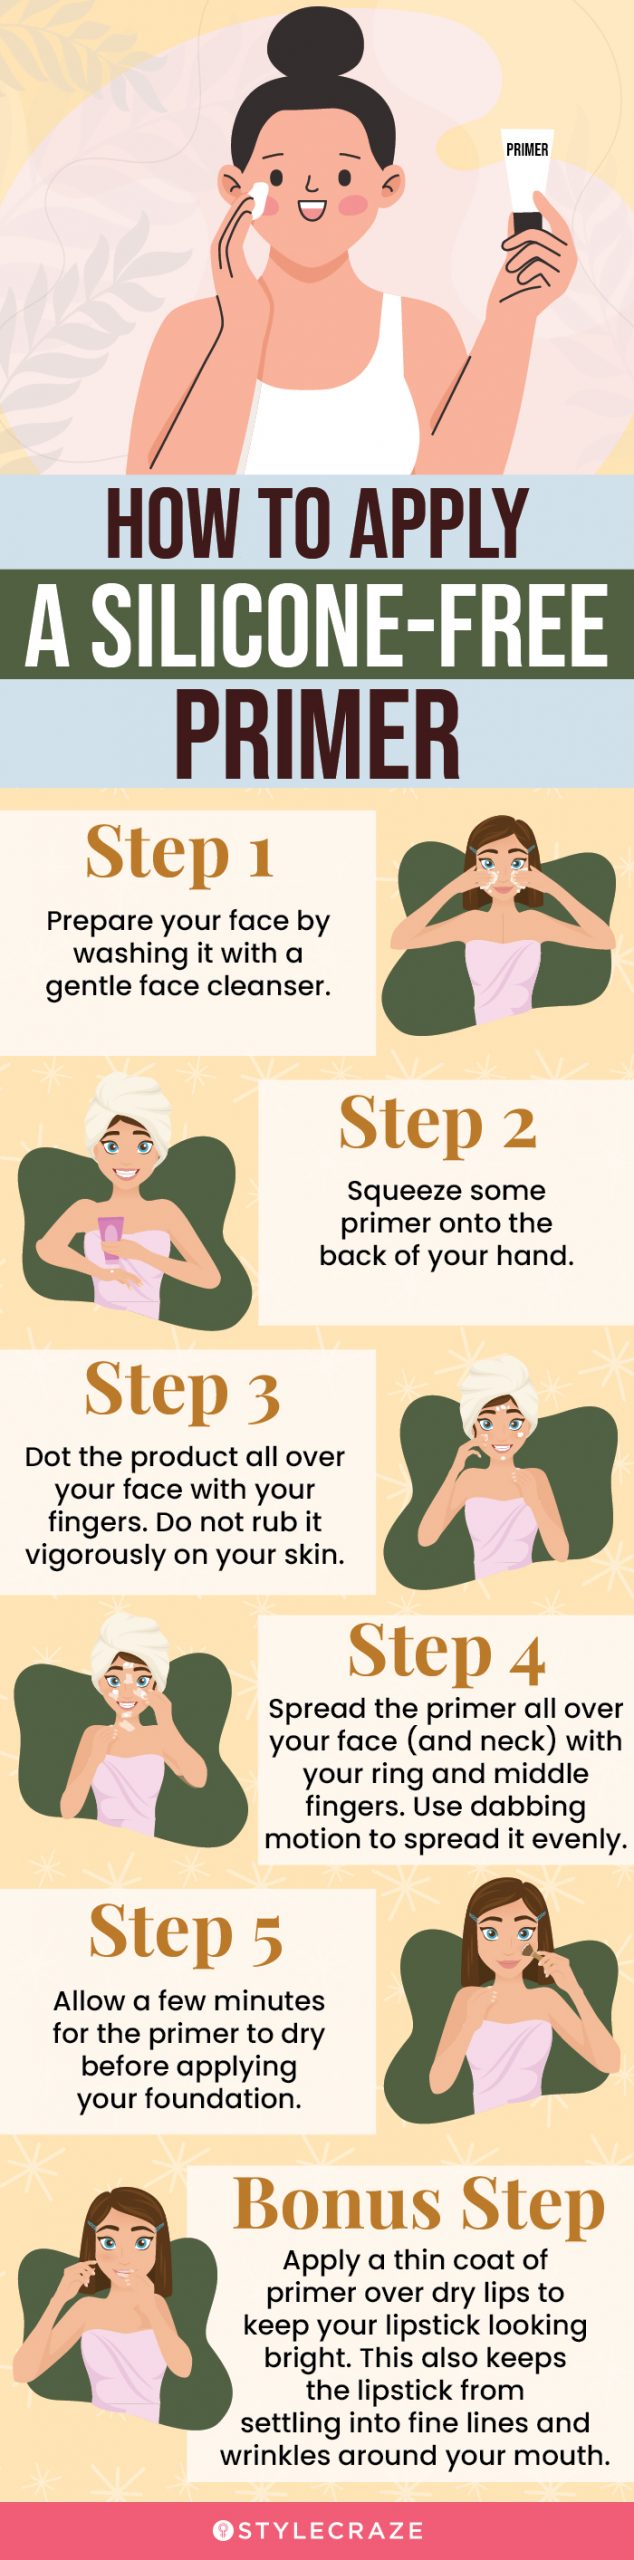 Silicone-Free Primers: Application Tips & Benefits (infographic)